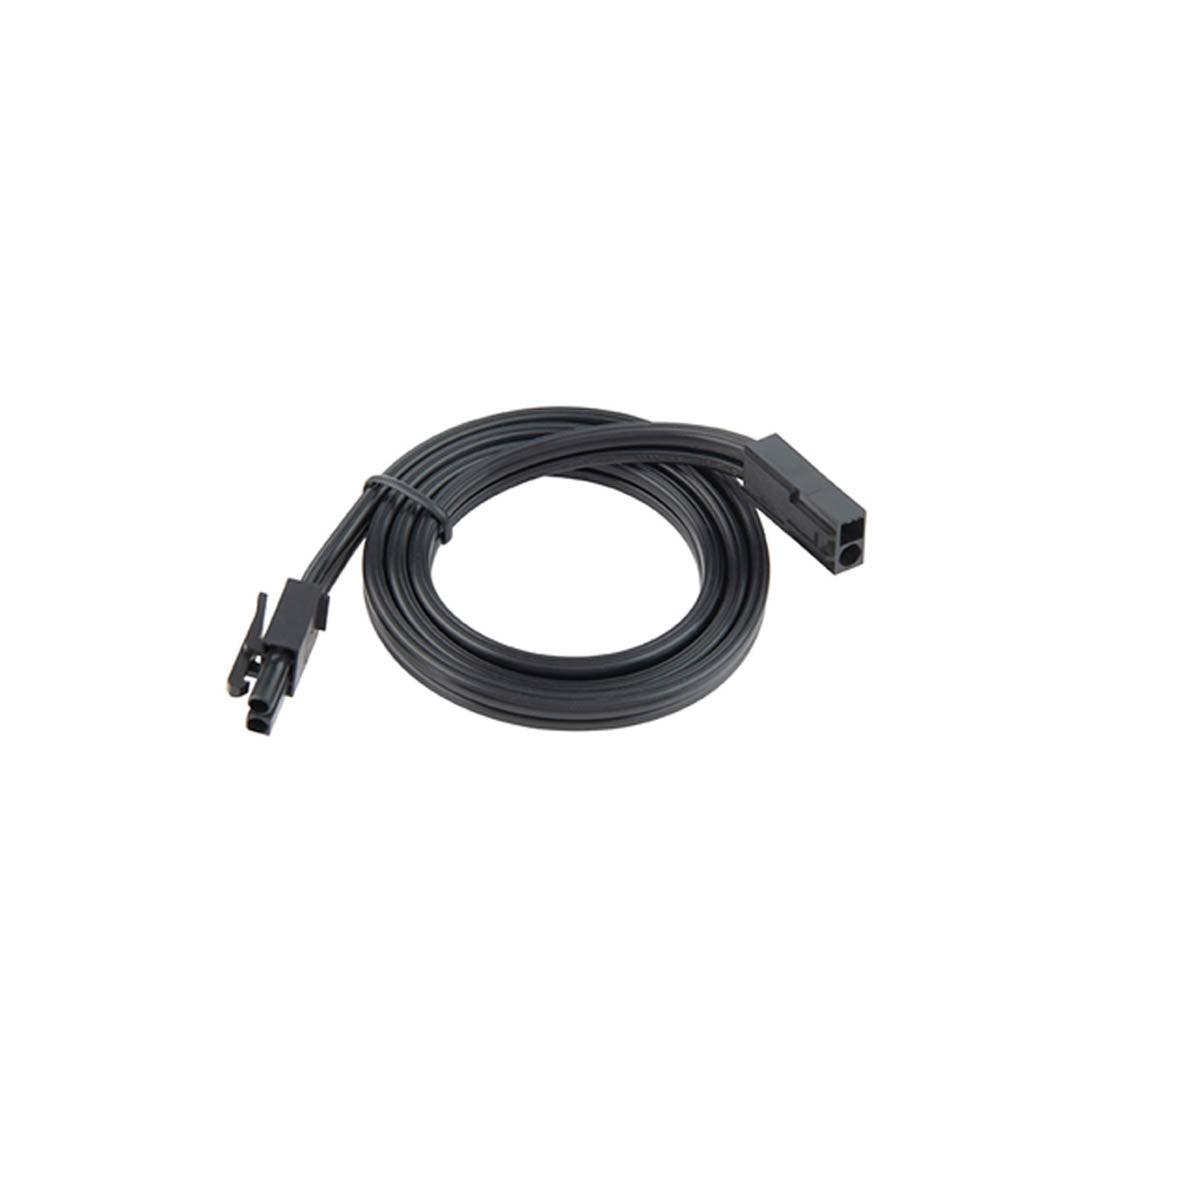 12in. Interconnect Cable for 3-CCT Puck Light, Black - Bees Lighting